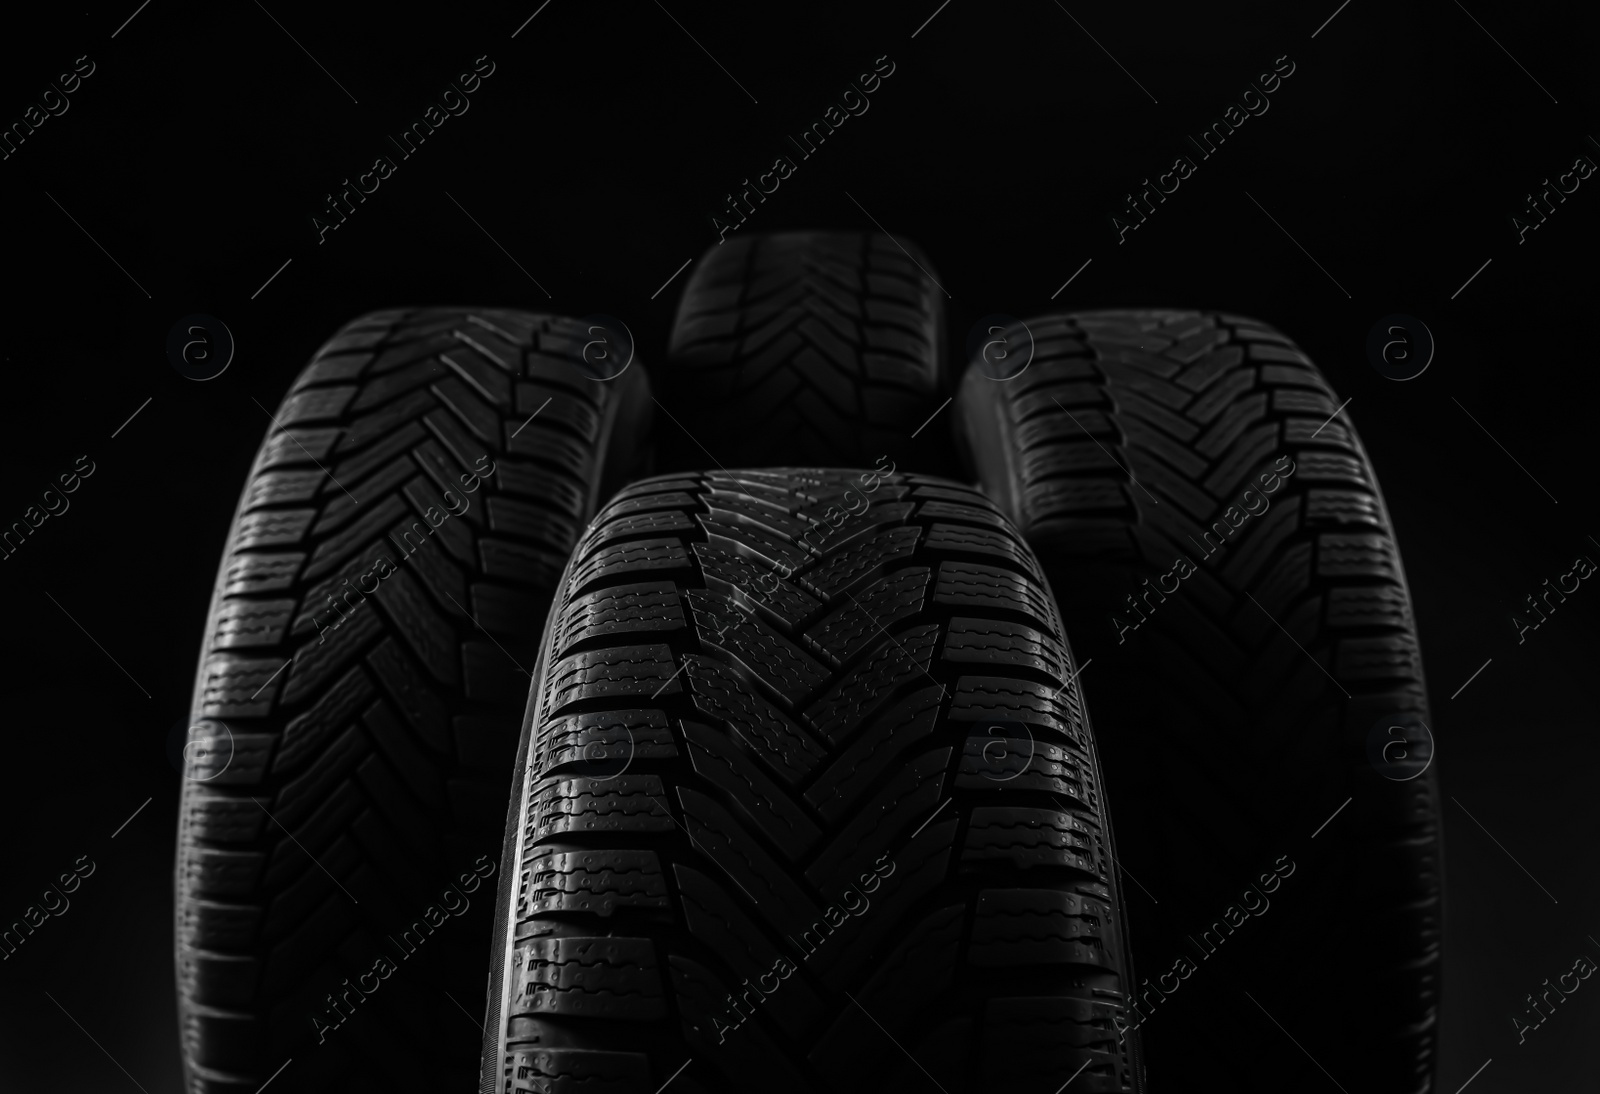 Photo of Set of new winter tires on black background, closeup